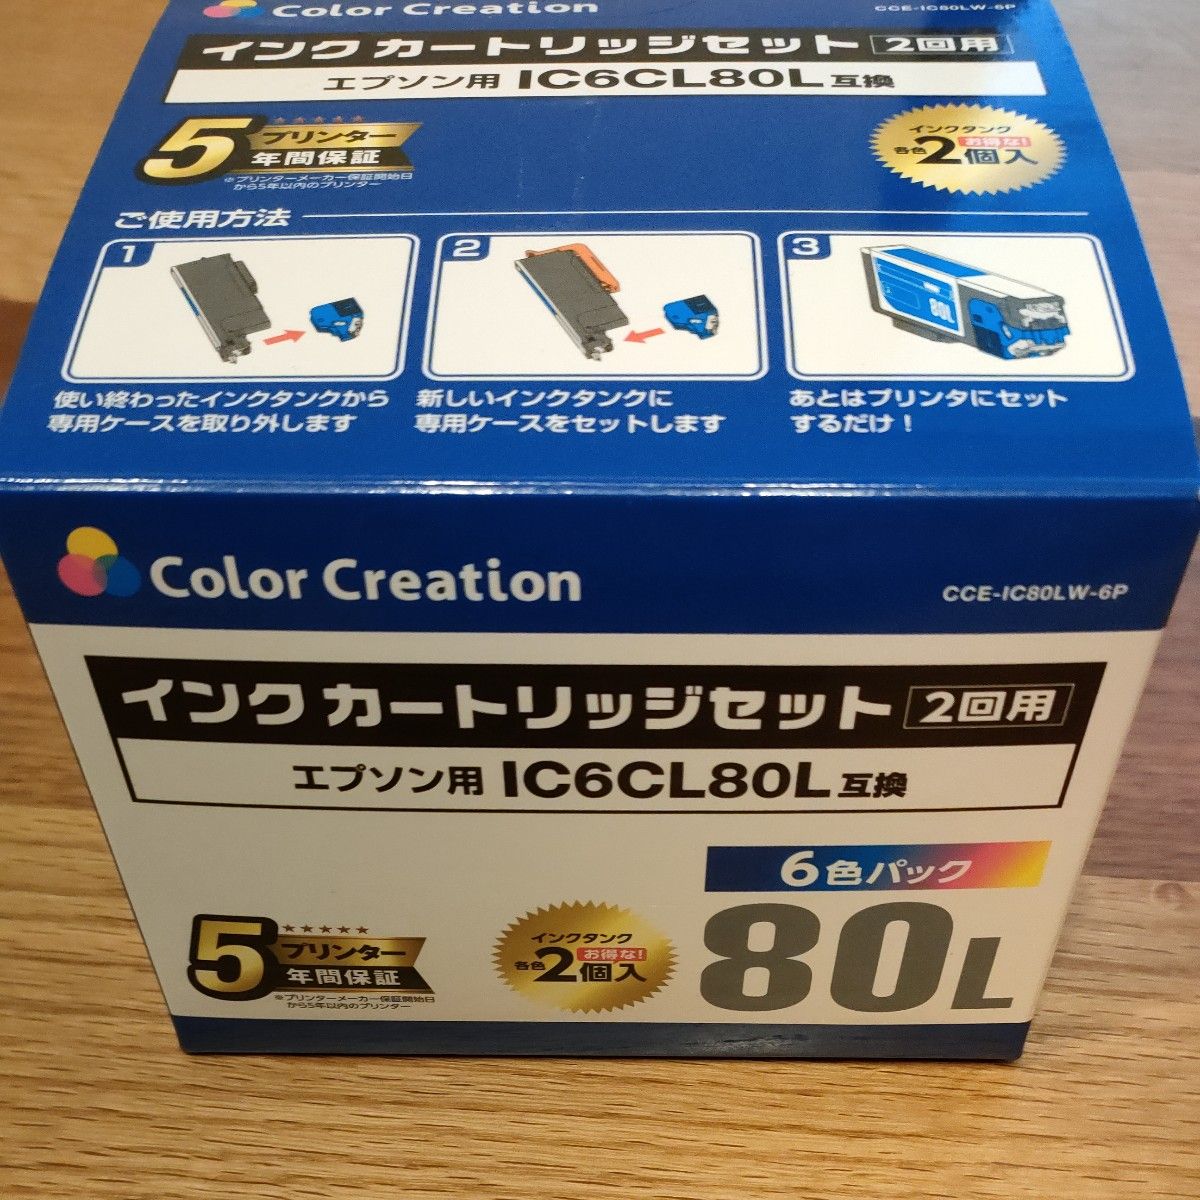 CCE-IC80LW-6P EPSON IC6CL80L互換6色パック 交換用インクタンク付　純正7個互換5個12個セット